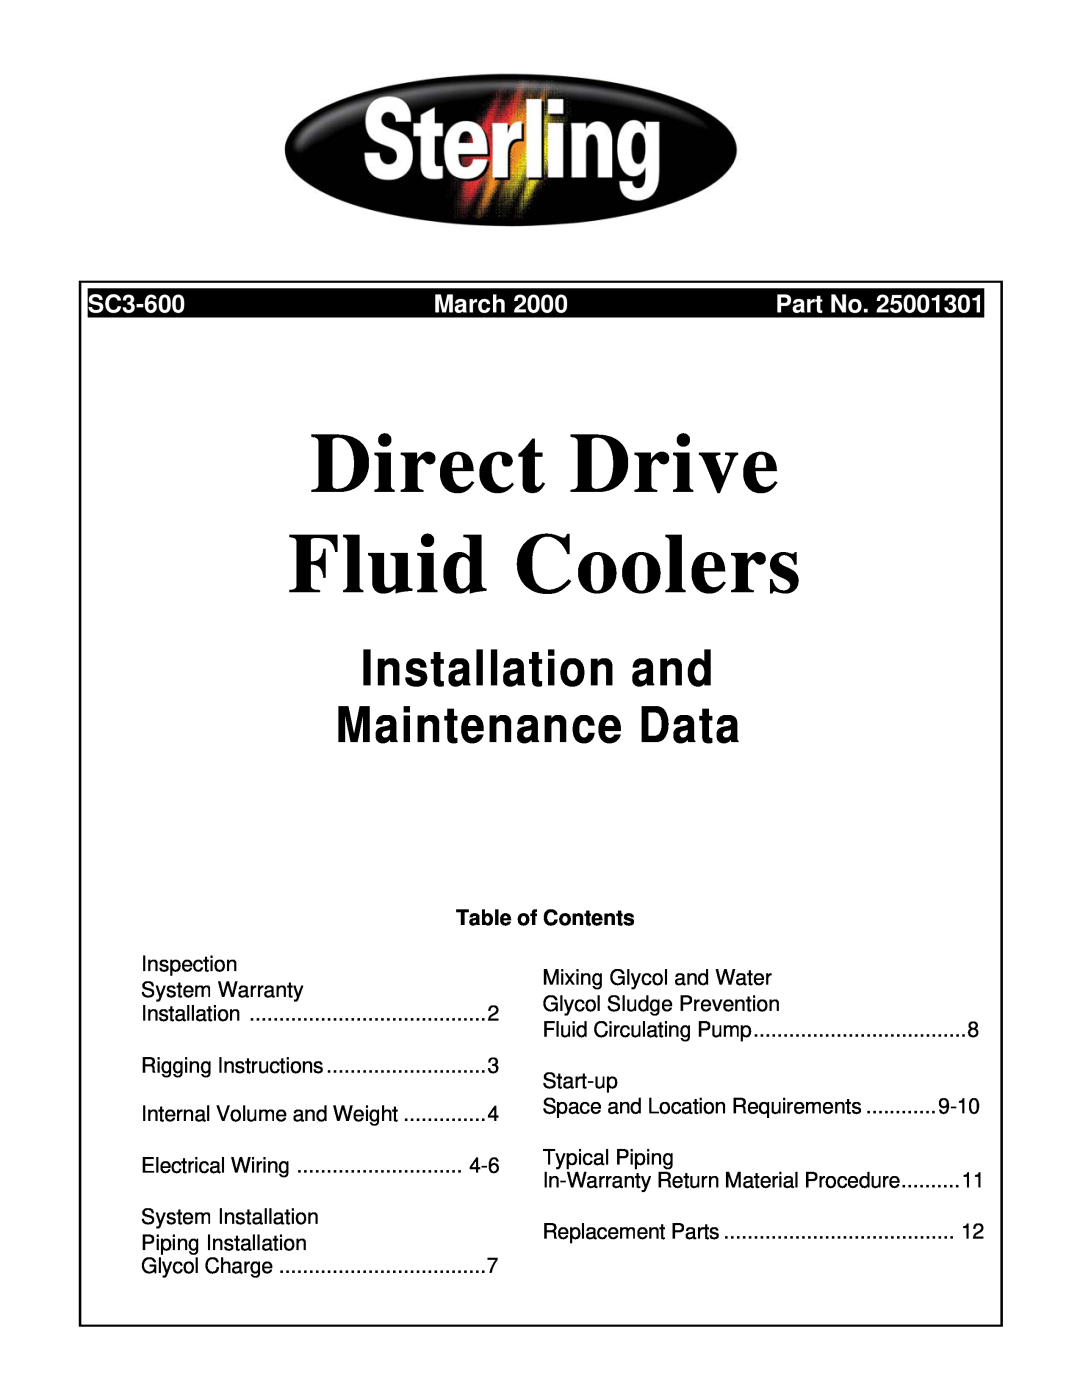 Sterling 25001301 warranty Table of Contents, Direct Drive Fluid Coolers, Installation and Maintenance Data, SC3-600 